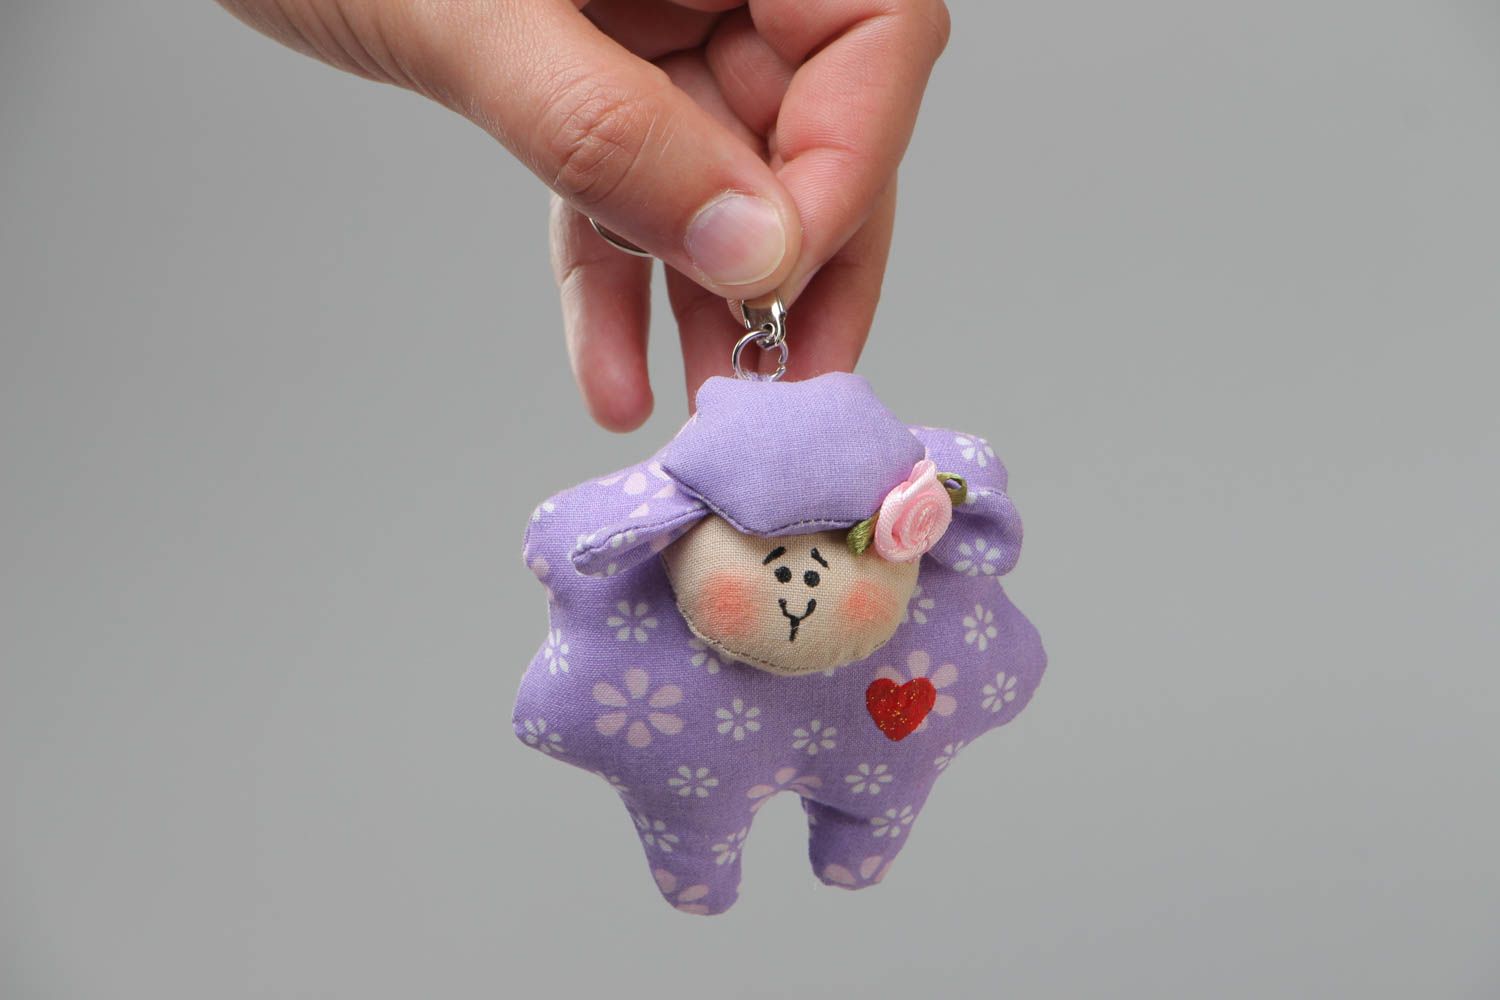 Handmade small soft toy keychain sewn of violet cotton fabric Lamb with red heart photo 5